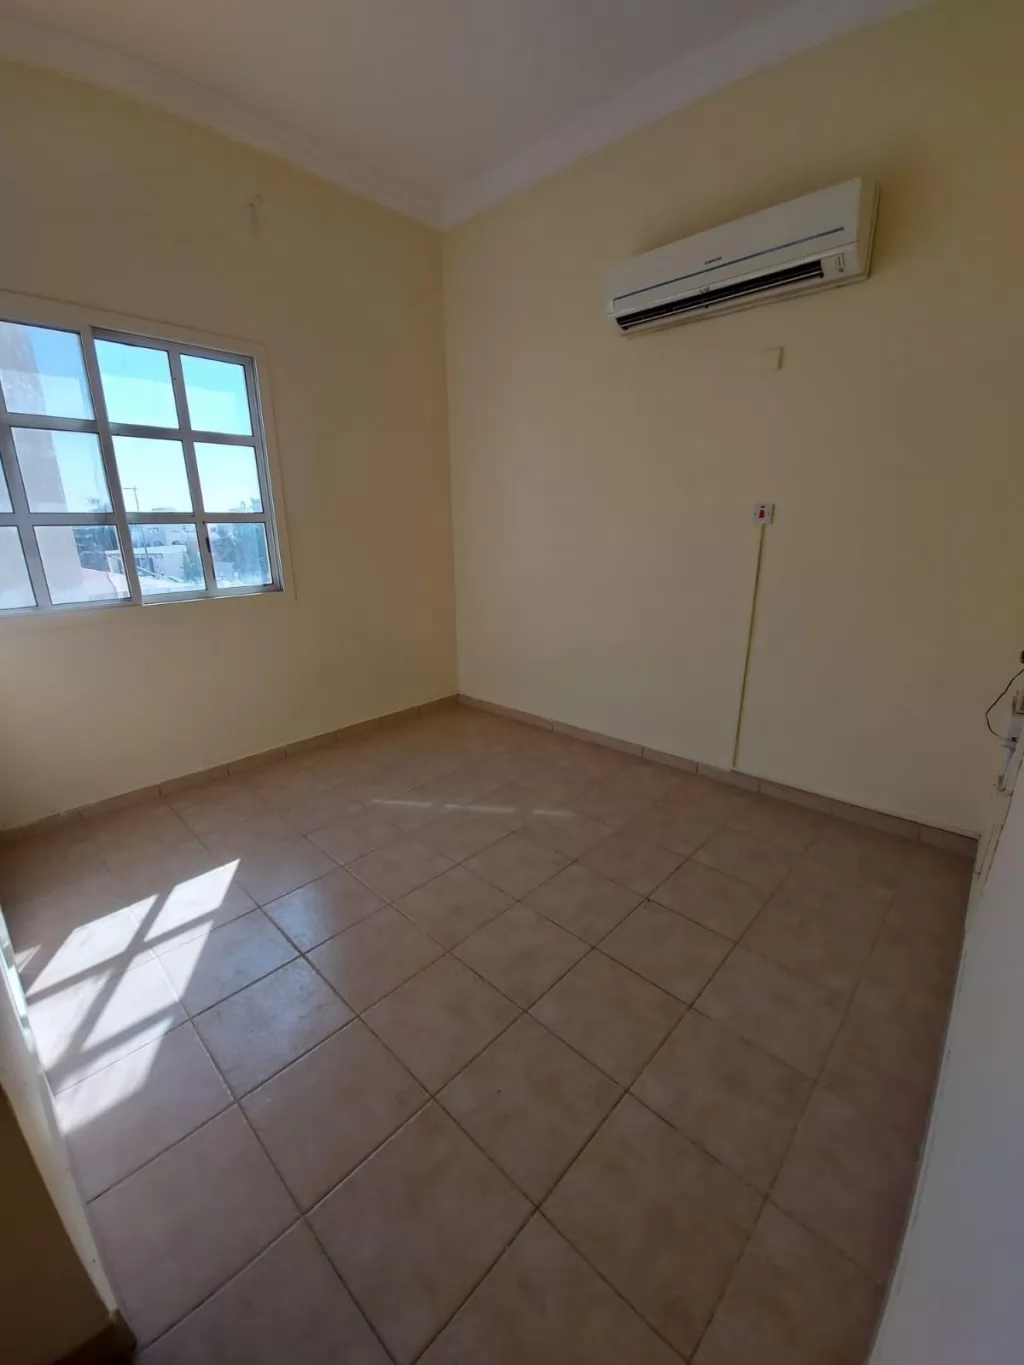 Residential Ready Property Studio U/F Apartment  for rent in Al-Maamoura , Doha-Qatar #12971 - 1  image 